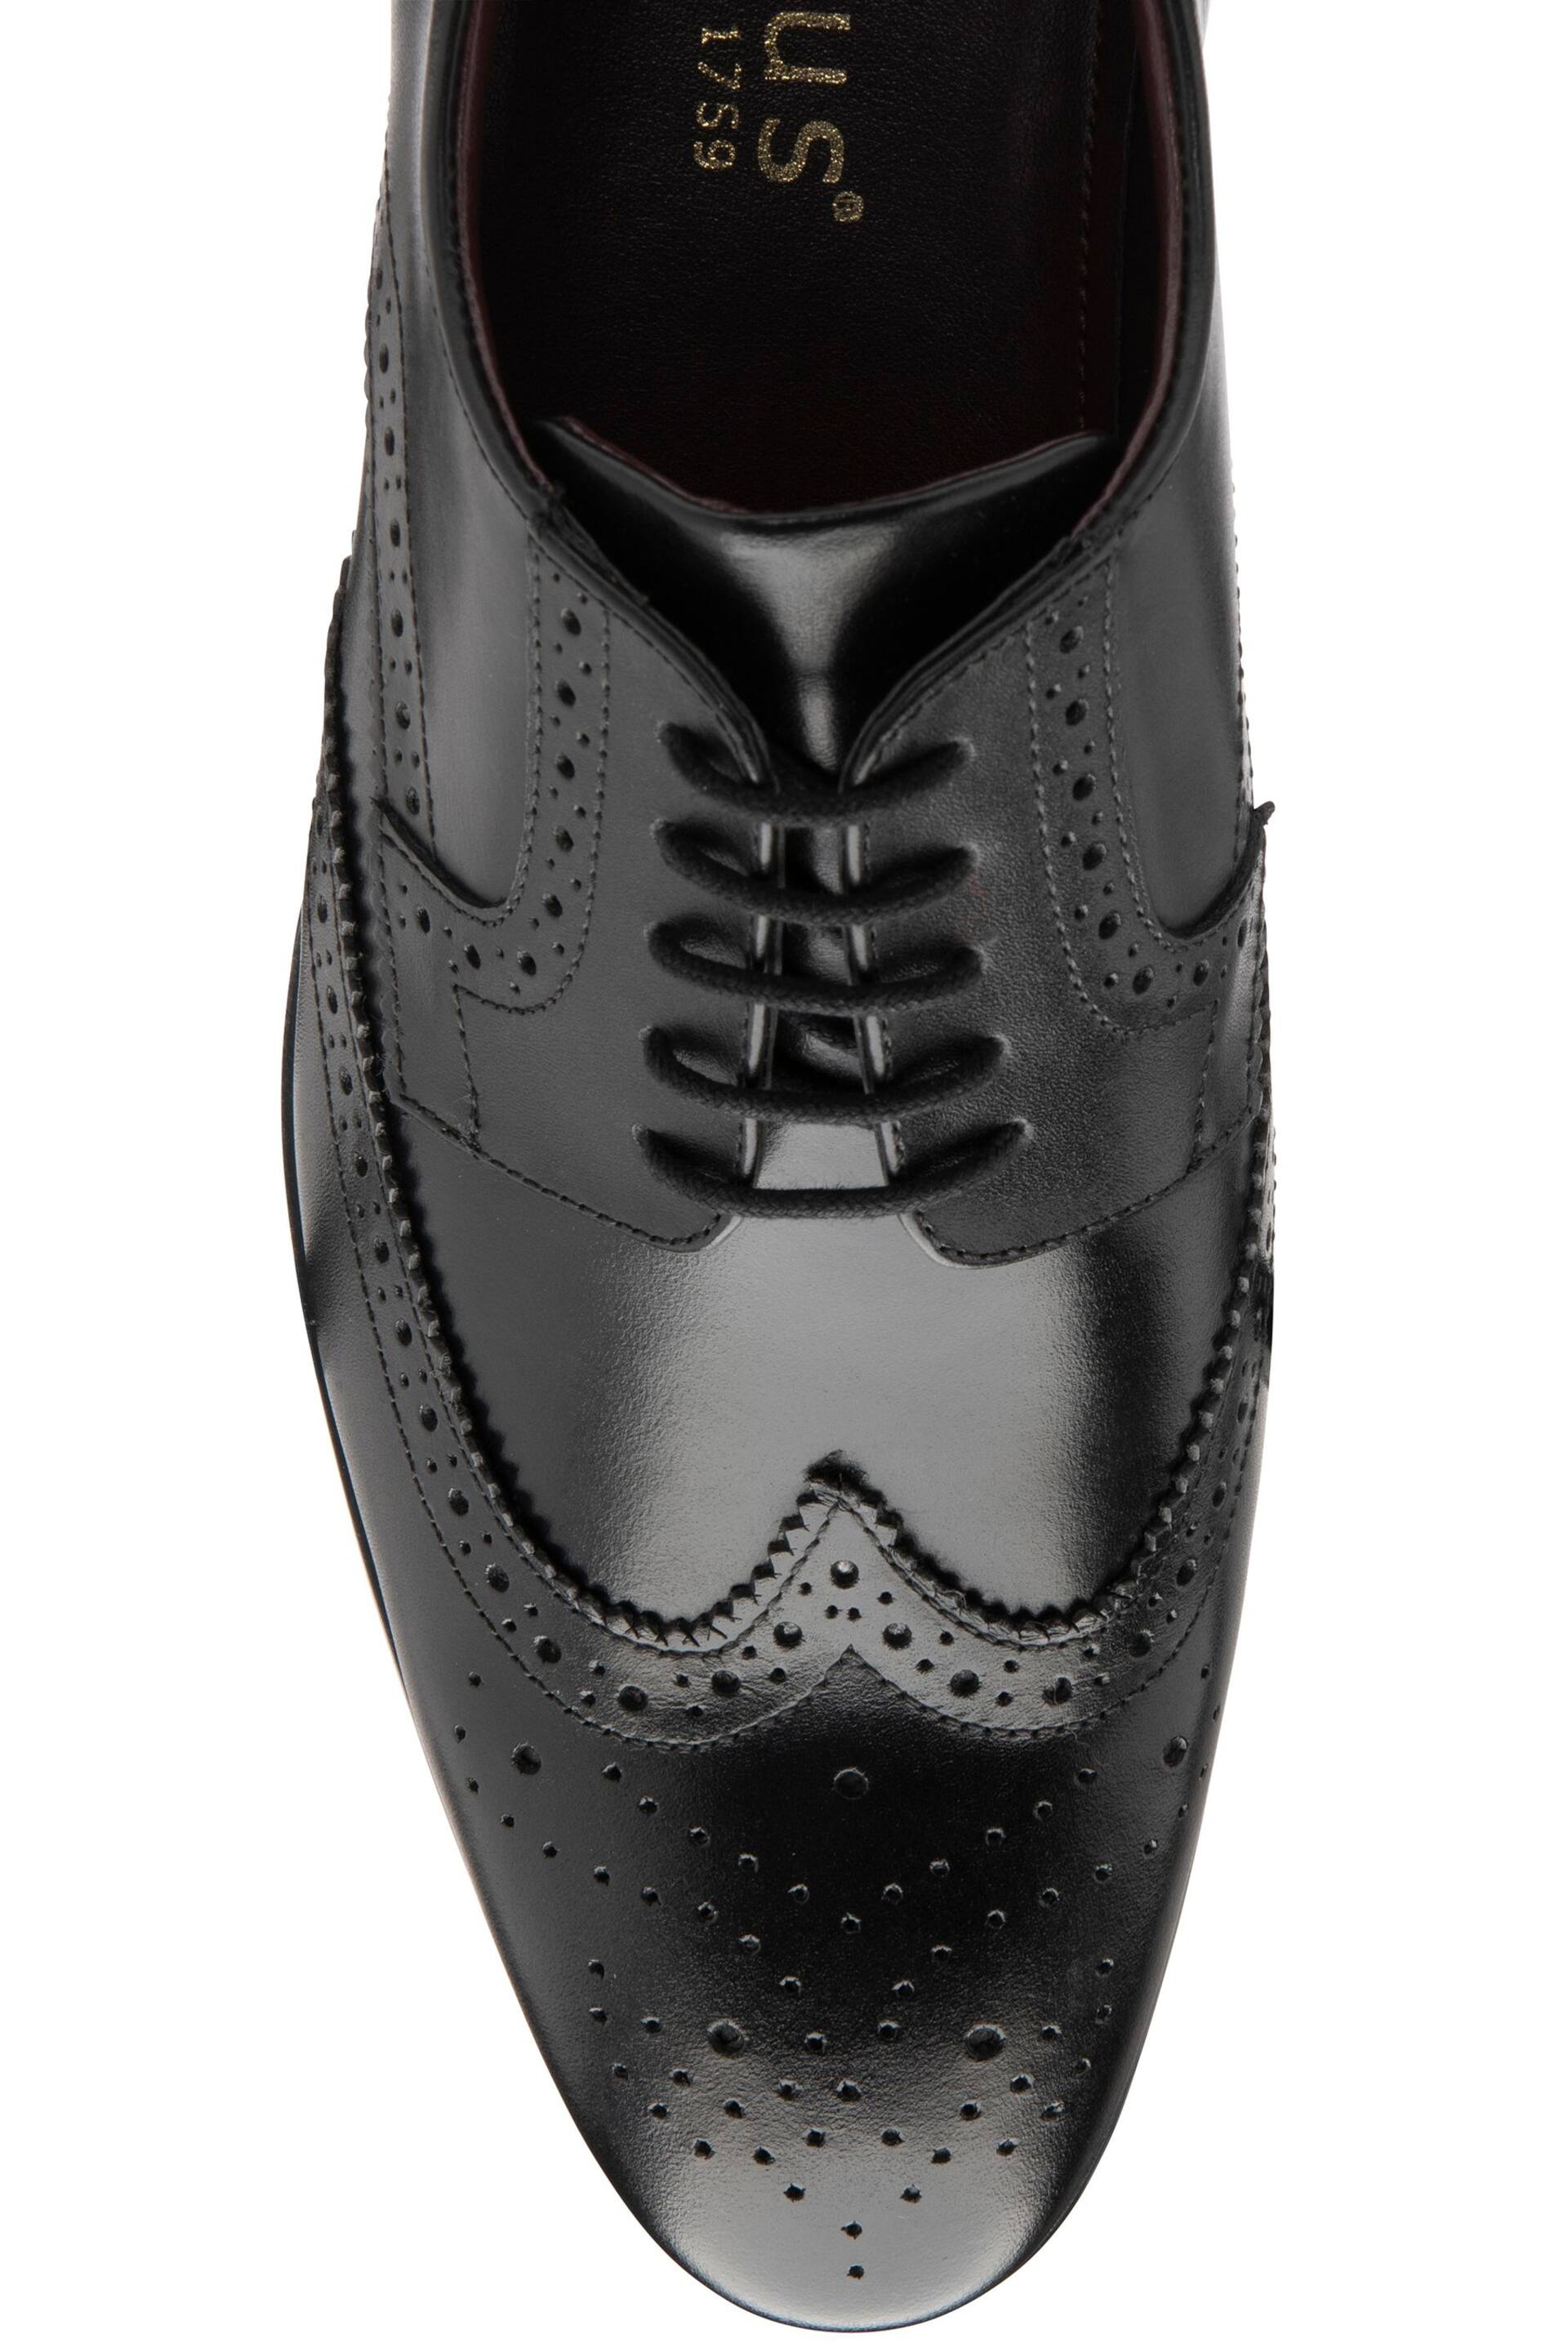 Lotus Jet Black Leather Lace-Up Brogues - Image 4 of 4